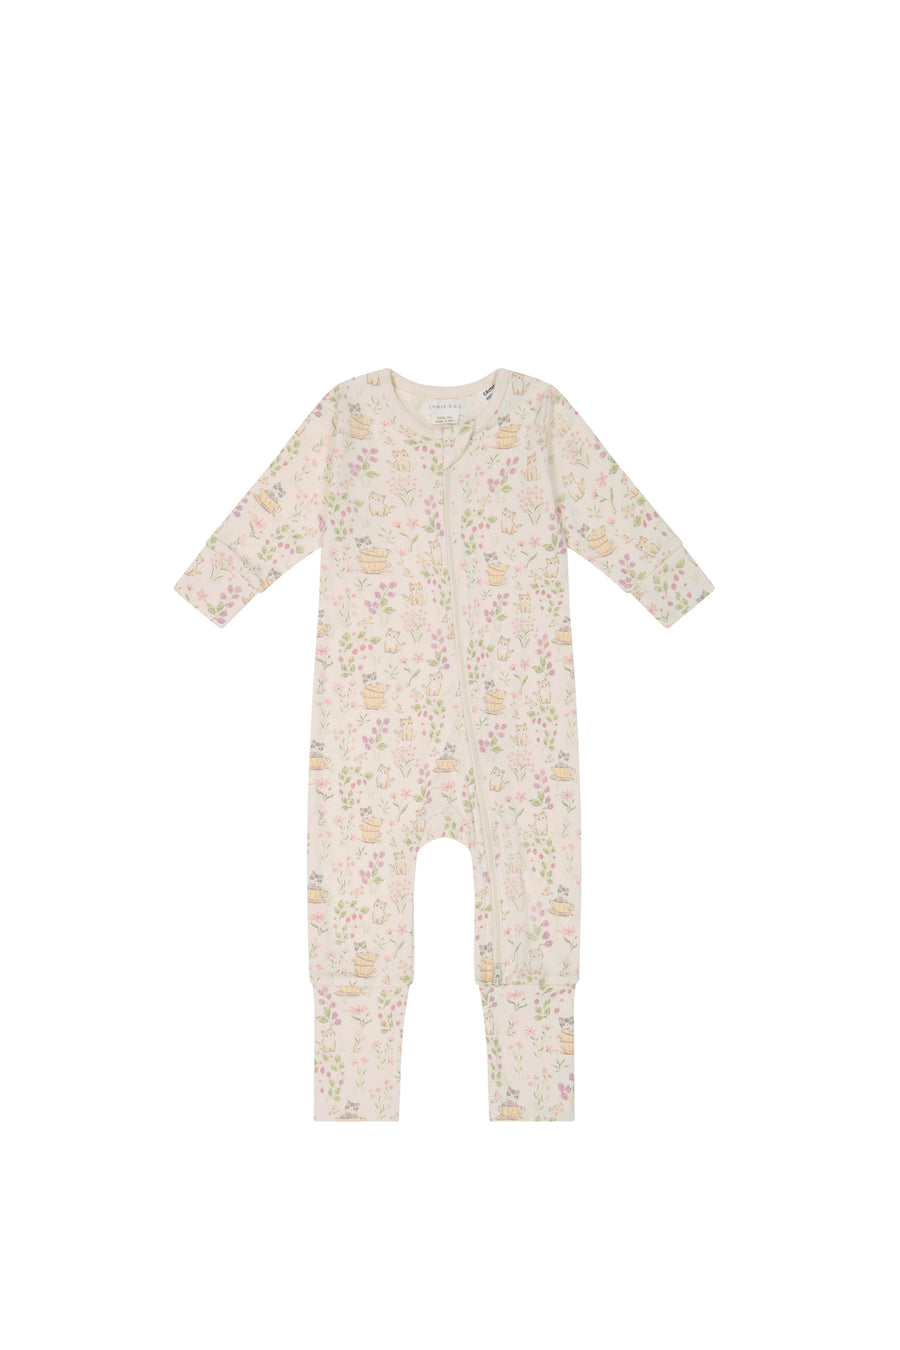 Organic Cotton Gracelyn Onepiece - Moons Garden Childrens Onepiece from Jamie Kay NZ